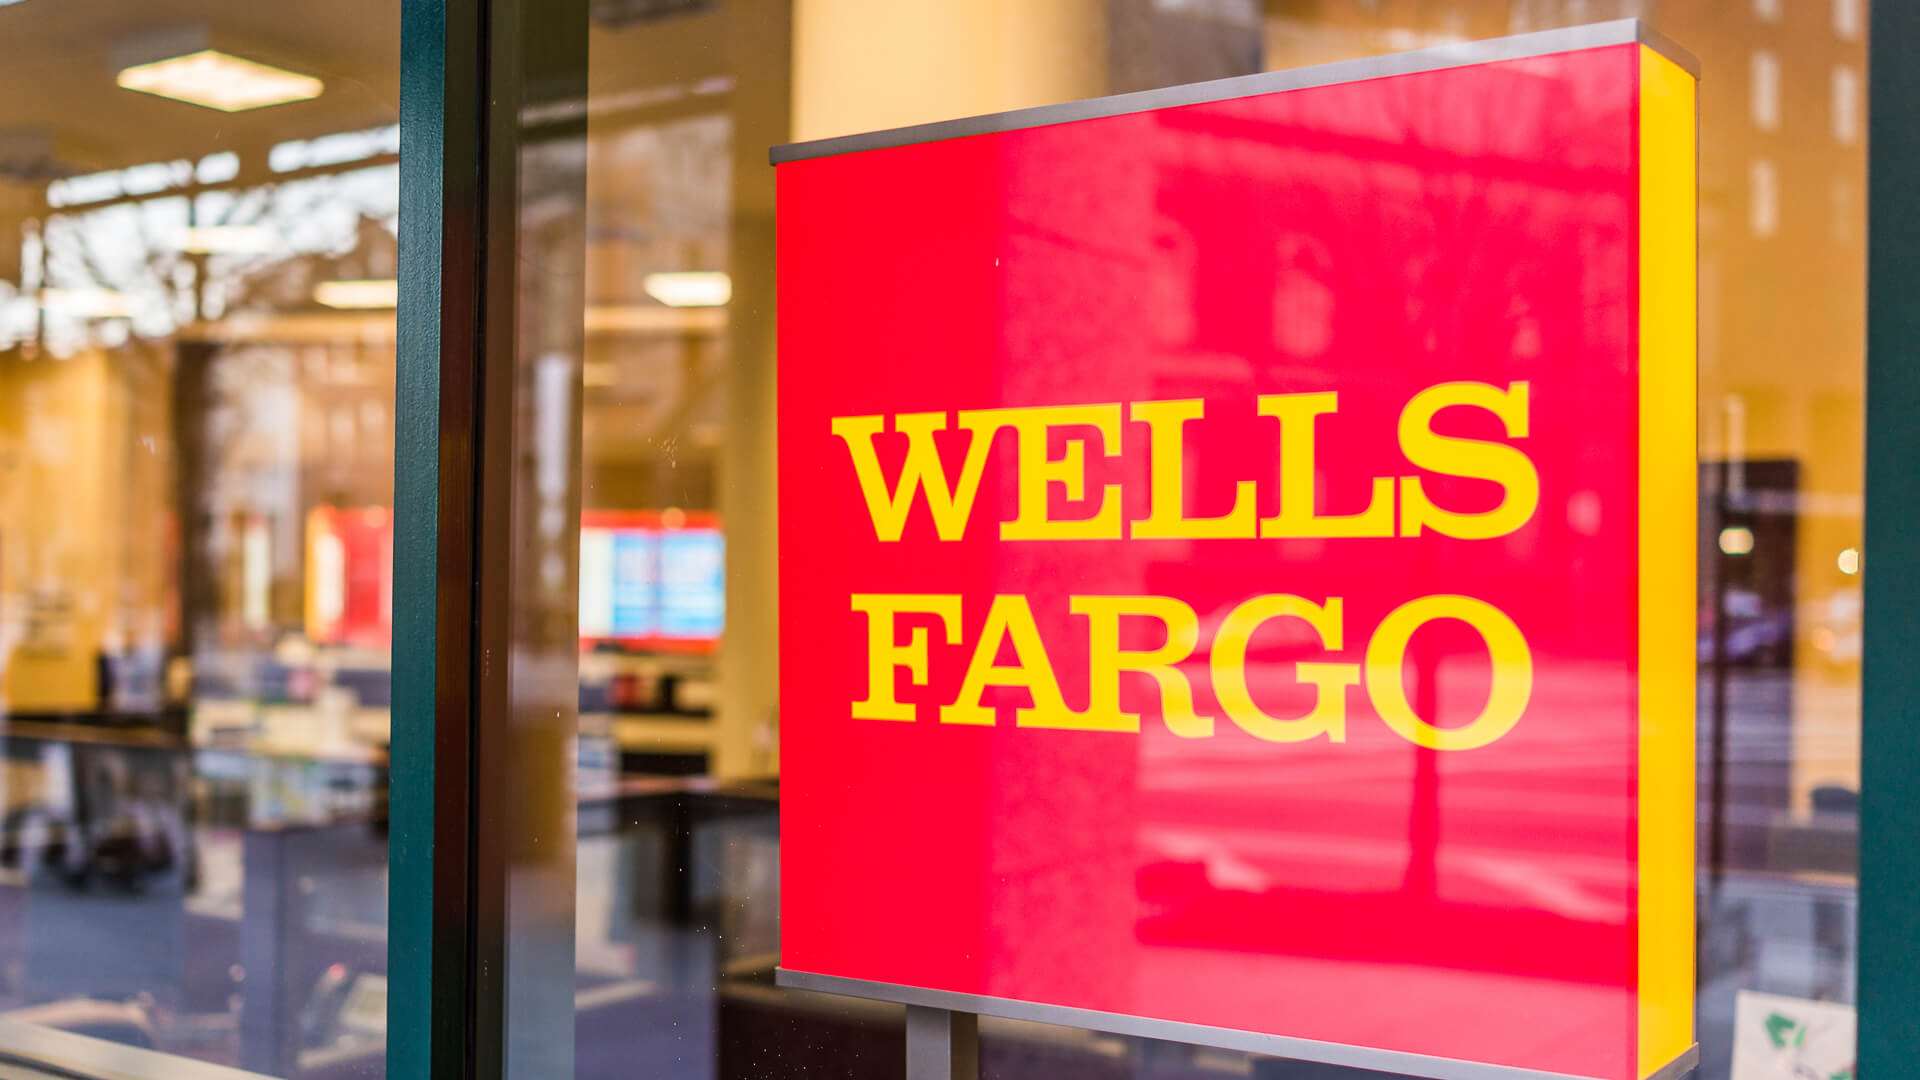 How To Get A Wells Fargo Checking Account